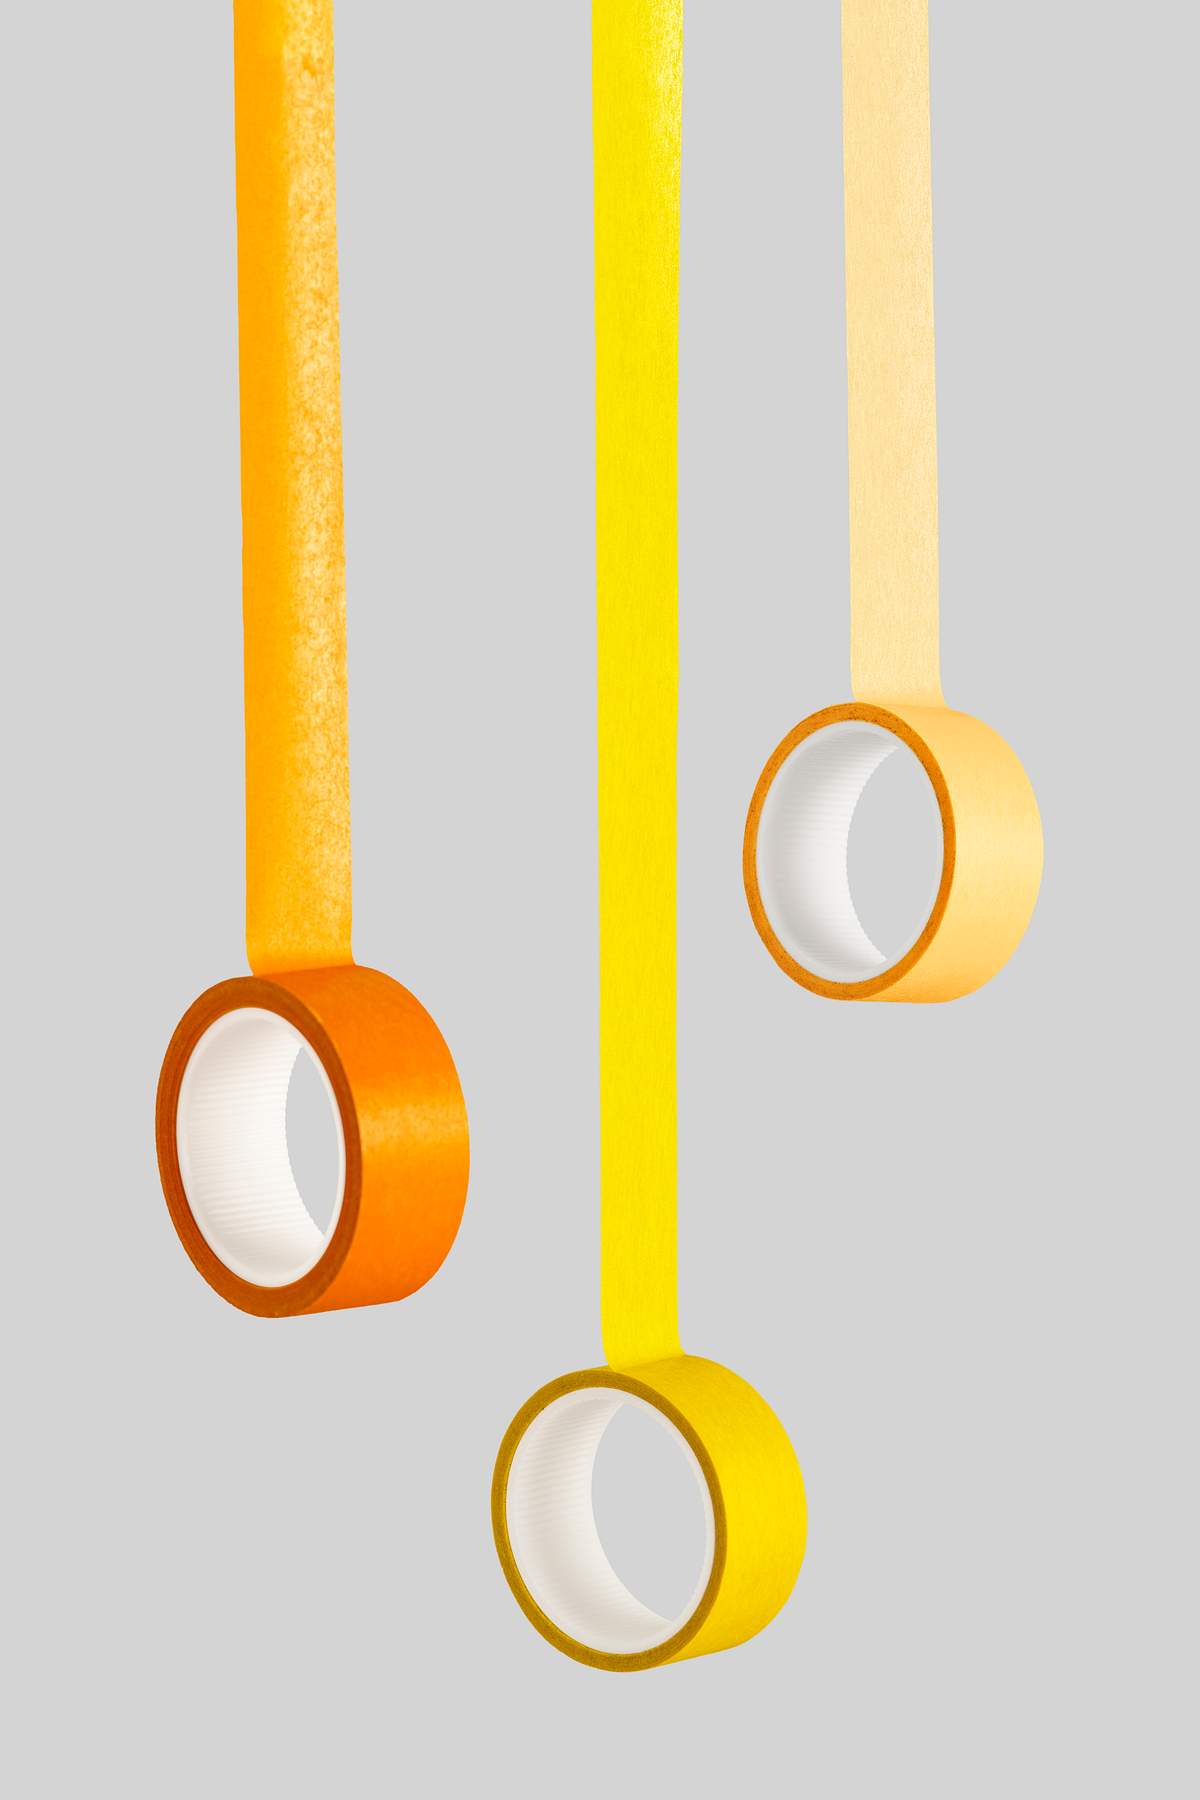 Download Yellow And Orange Rolls Of Tape Mockup Design Resources Royalty Free Illustration 2372167 PSD Mockup Templates